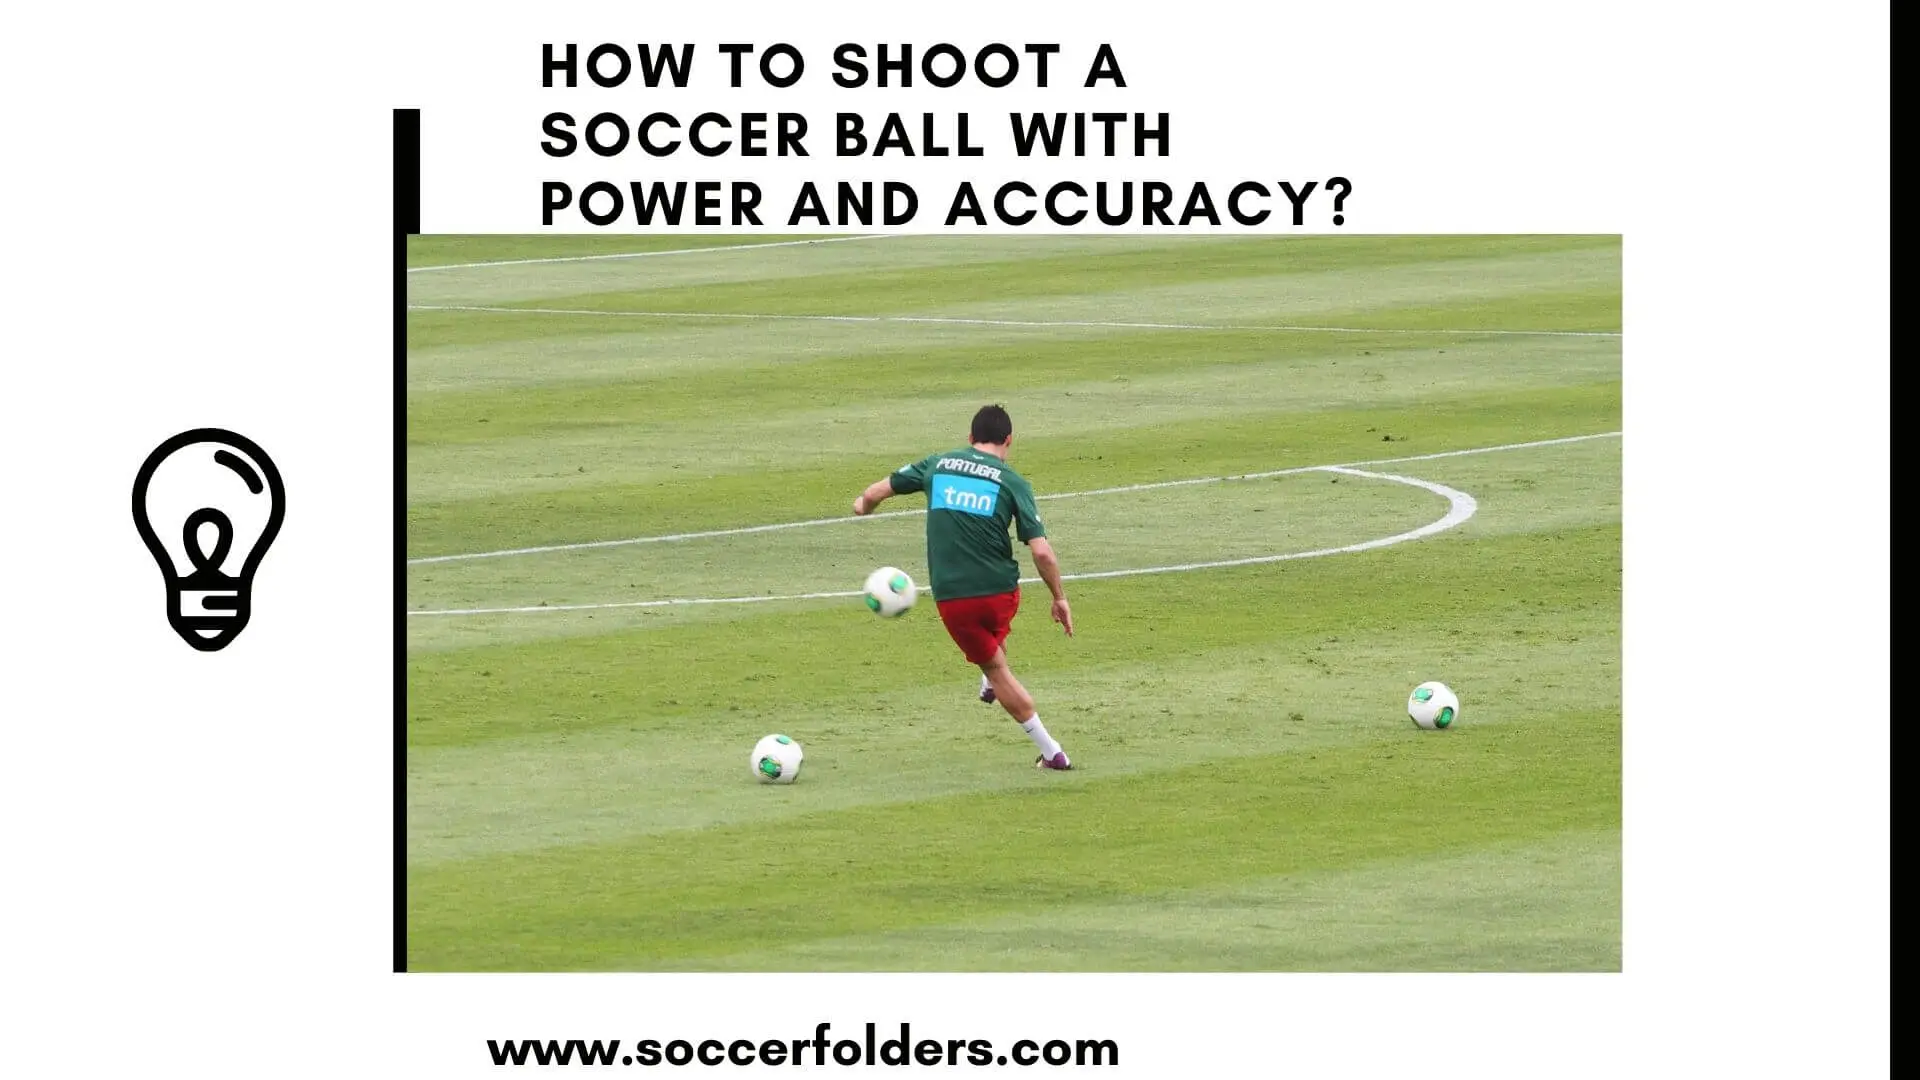 How to shoot a soccer ball with power and accuracy - Featured image